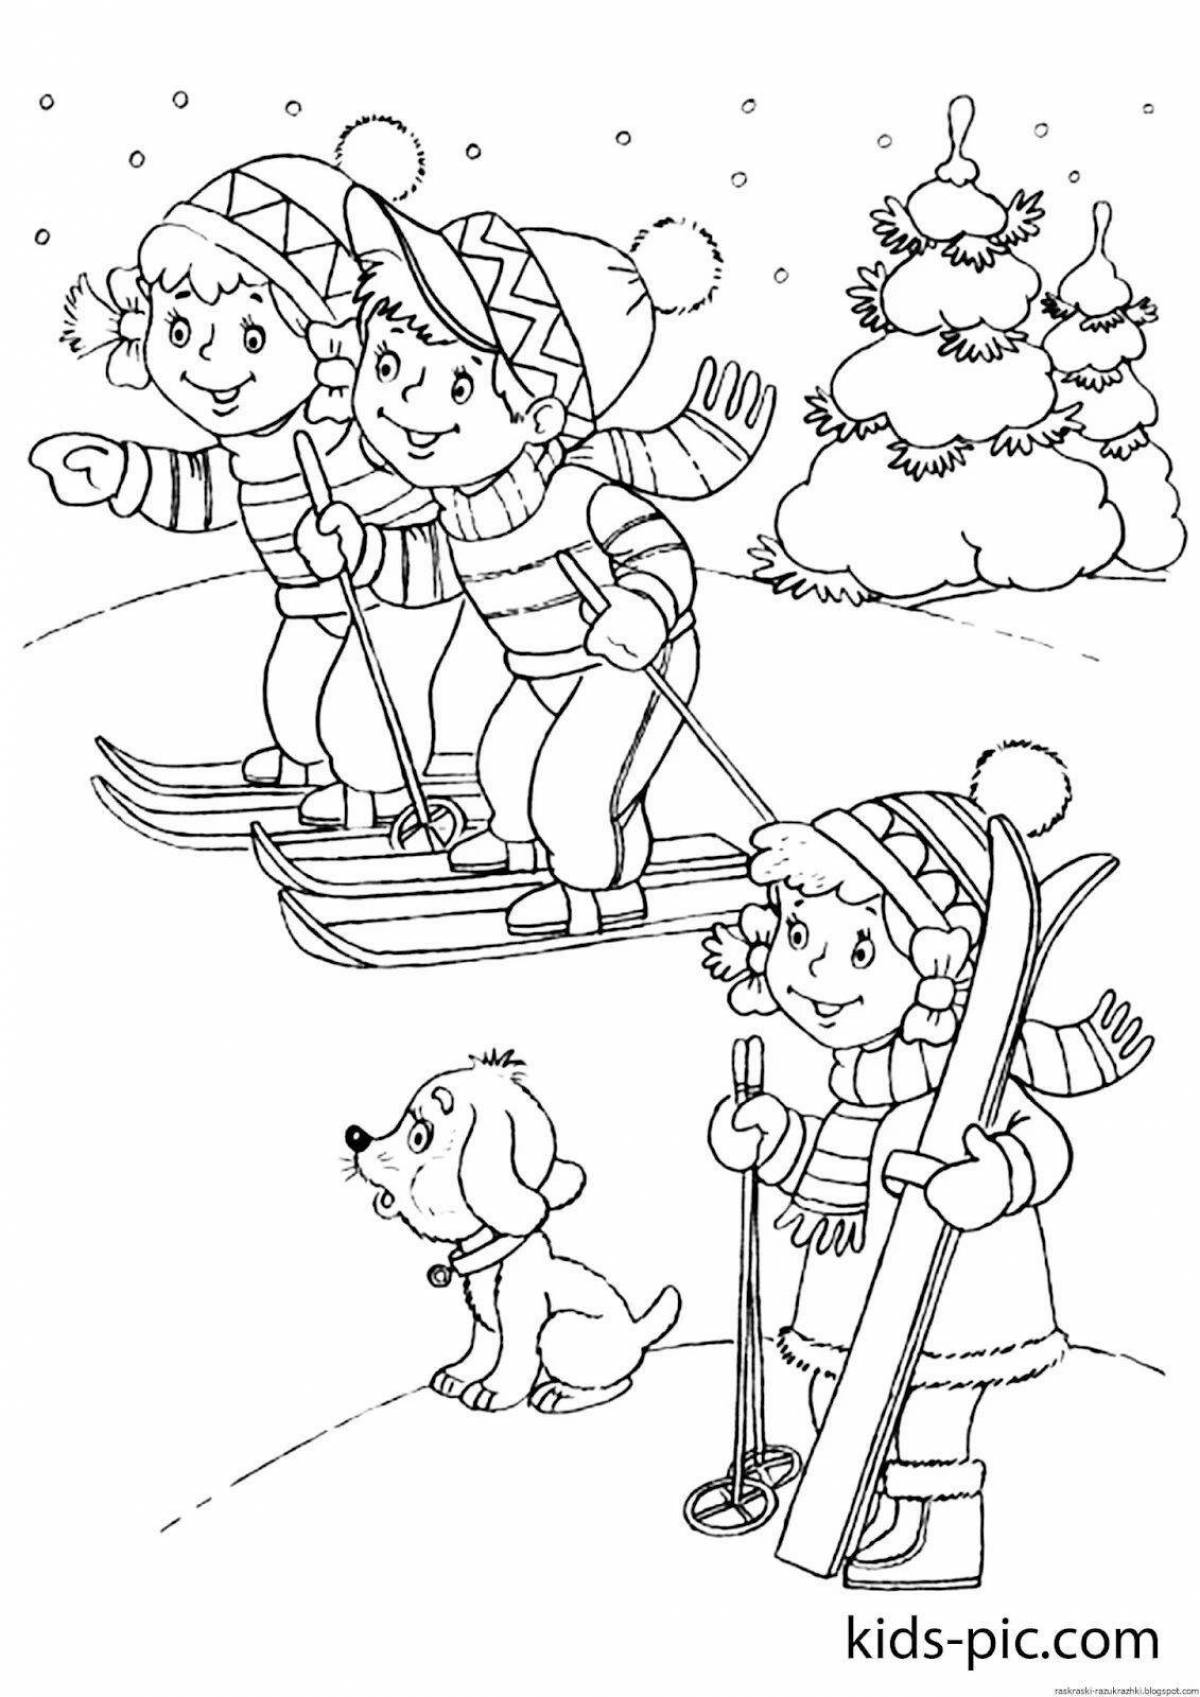 Exquisite winter fun coloring book for 6 year olds